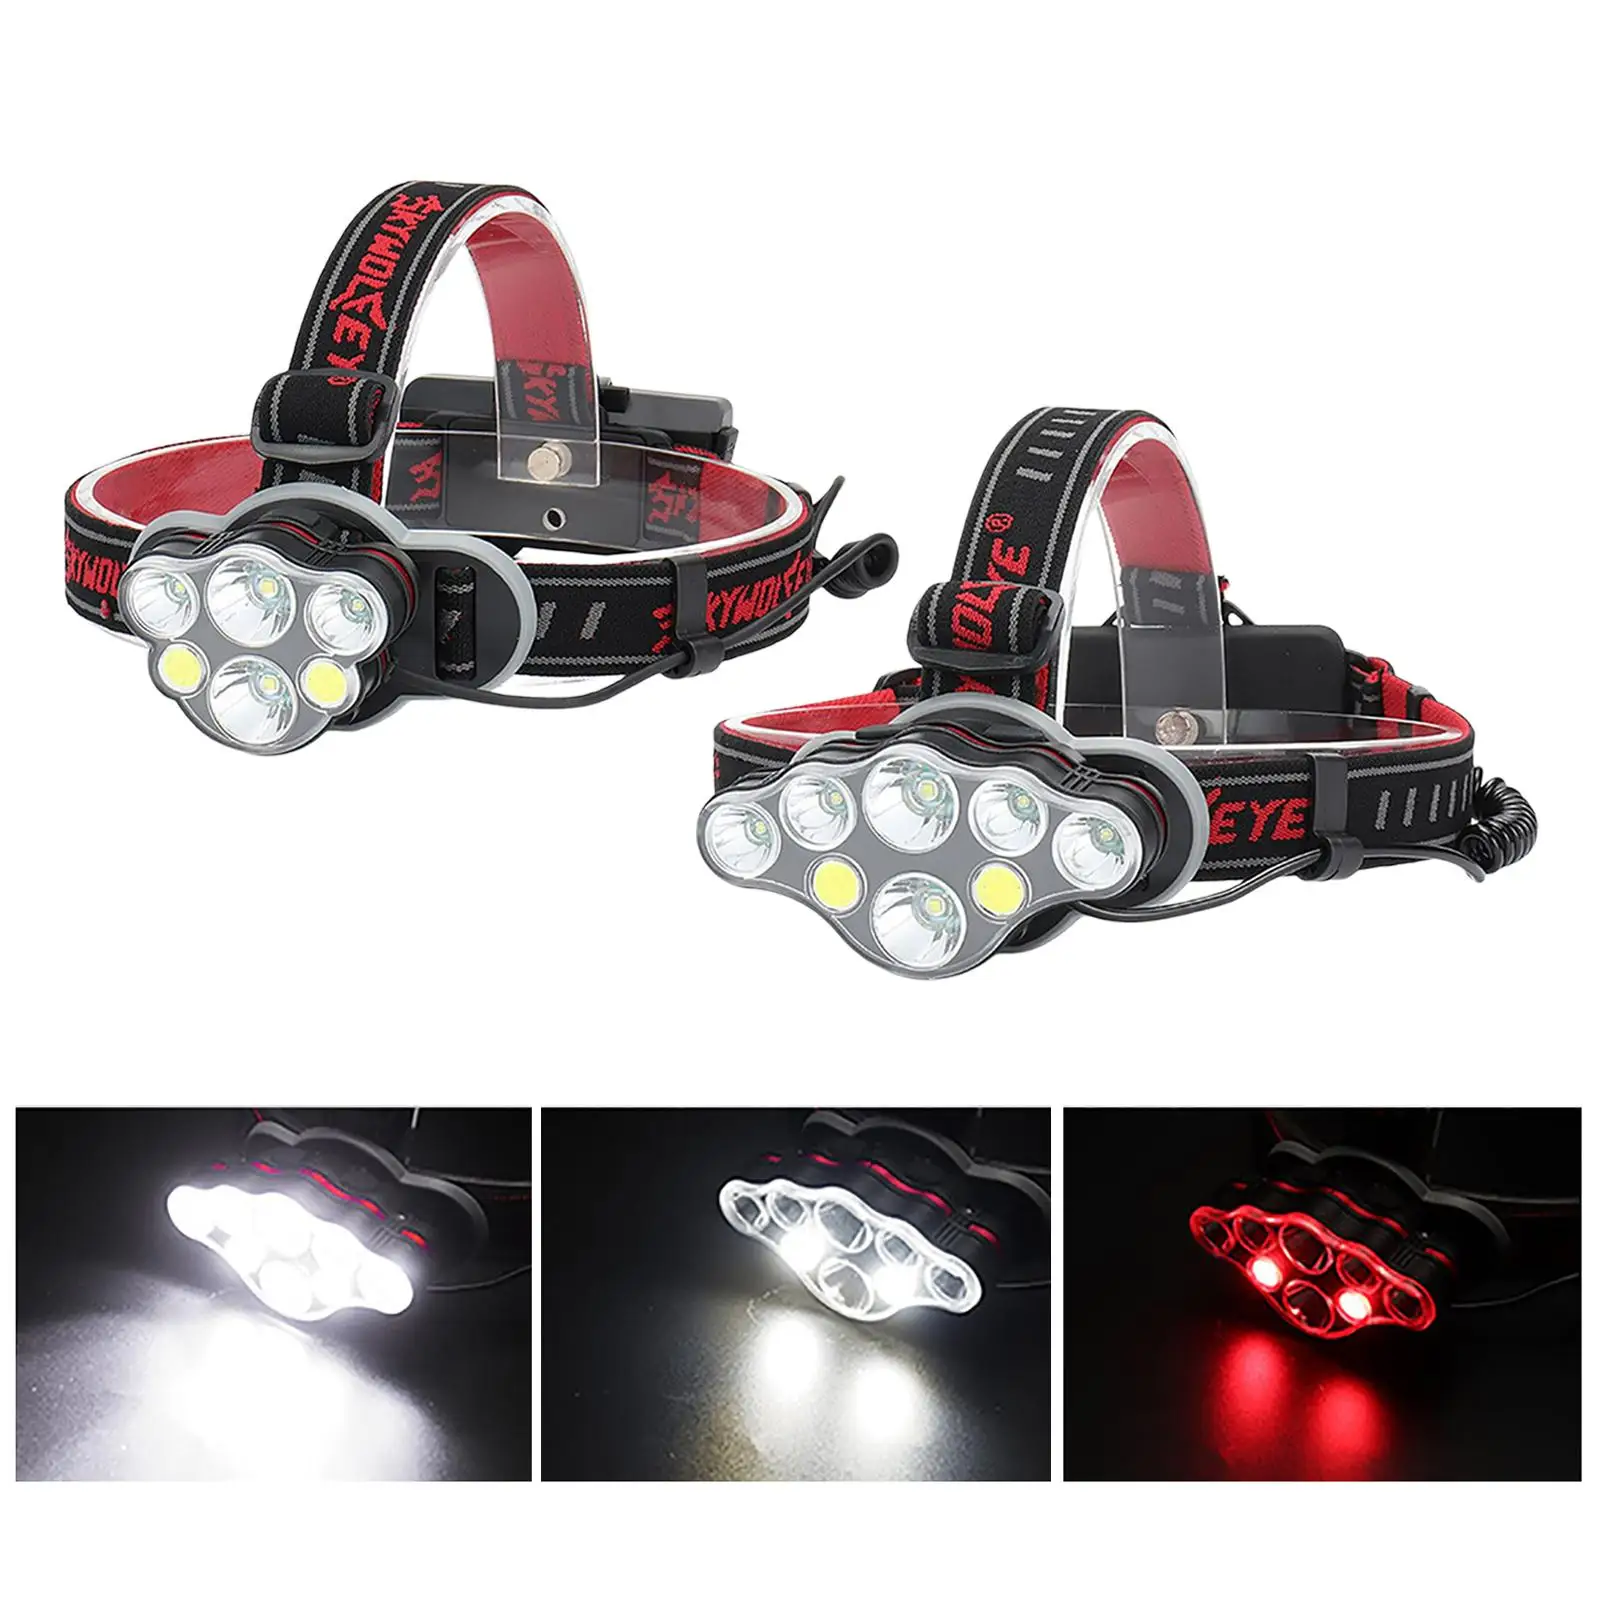 LED Headlight with Red Light Rechargeable Multi Functions 8 Modes Waterproof Headlamp for Outdoor Camping Fishing Cycling Adults